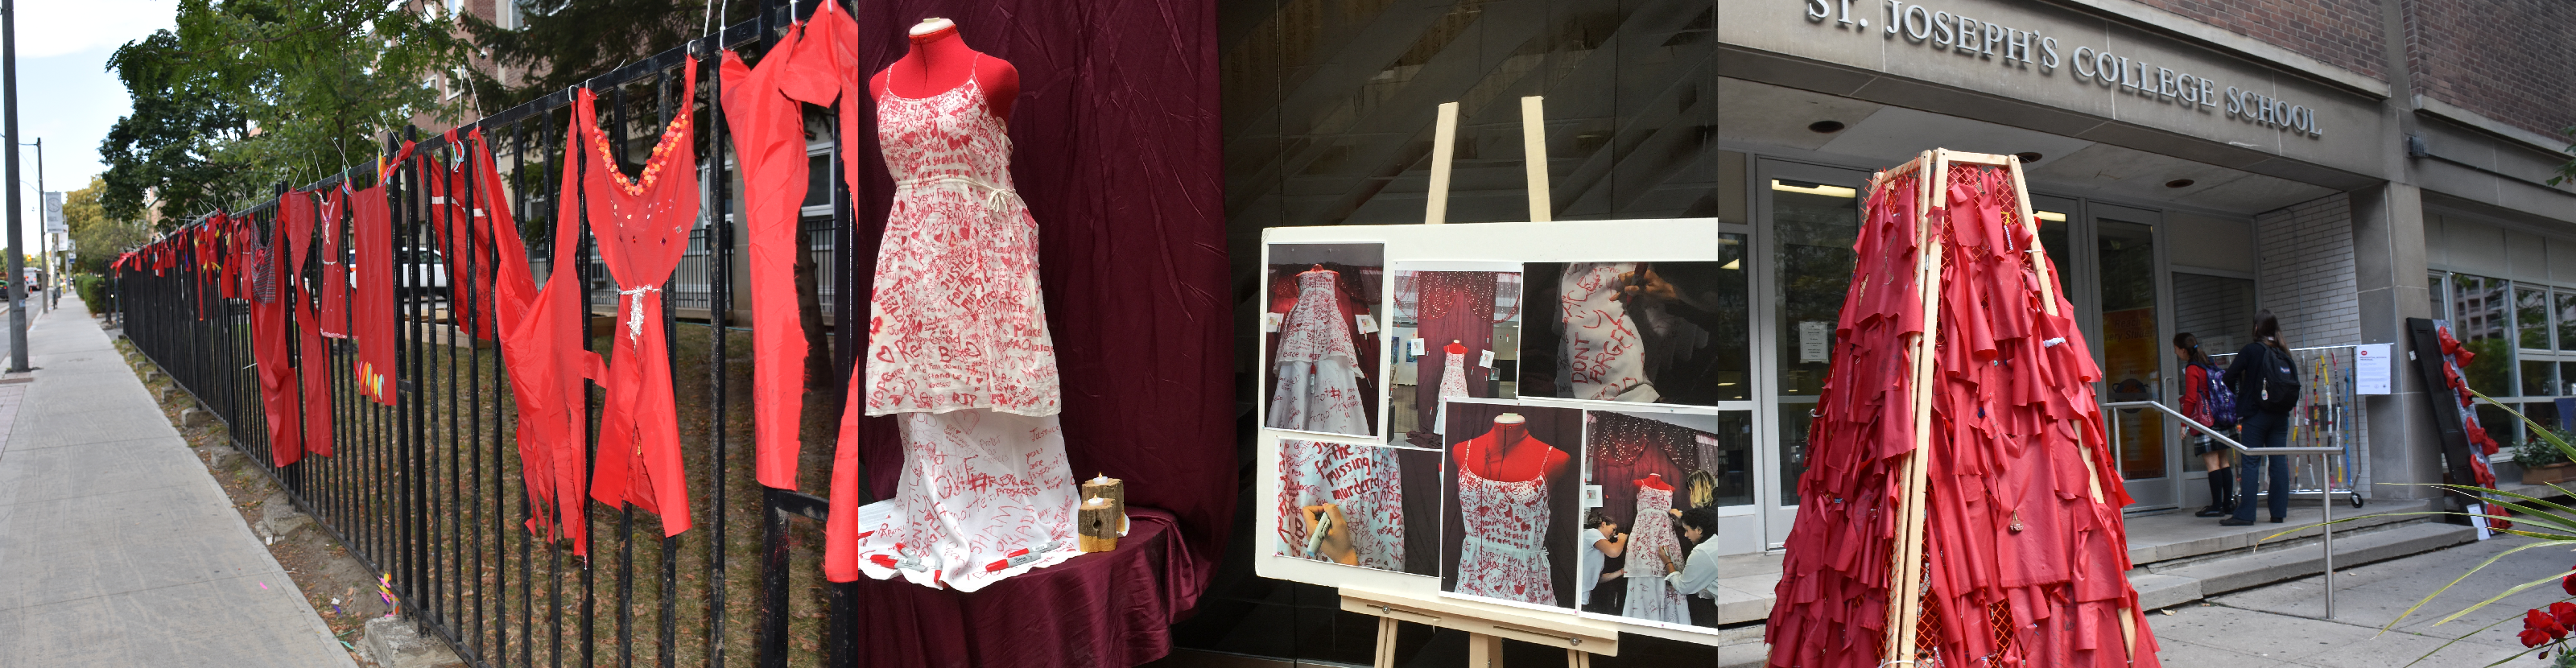 Three installations at TCDSB schools and offices in honour of Red Dress Day. The first shows a row of red dresses draped across the fences of a TCDSB school. The second shows a white dress on which is written messages in red for the missing women, along with an easel nearby showing a collage of process pictures of the installation. The third shows red flowers and installations of red fabric outside of St. Joseph's College School front entrance.